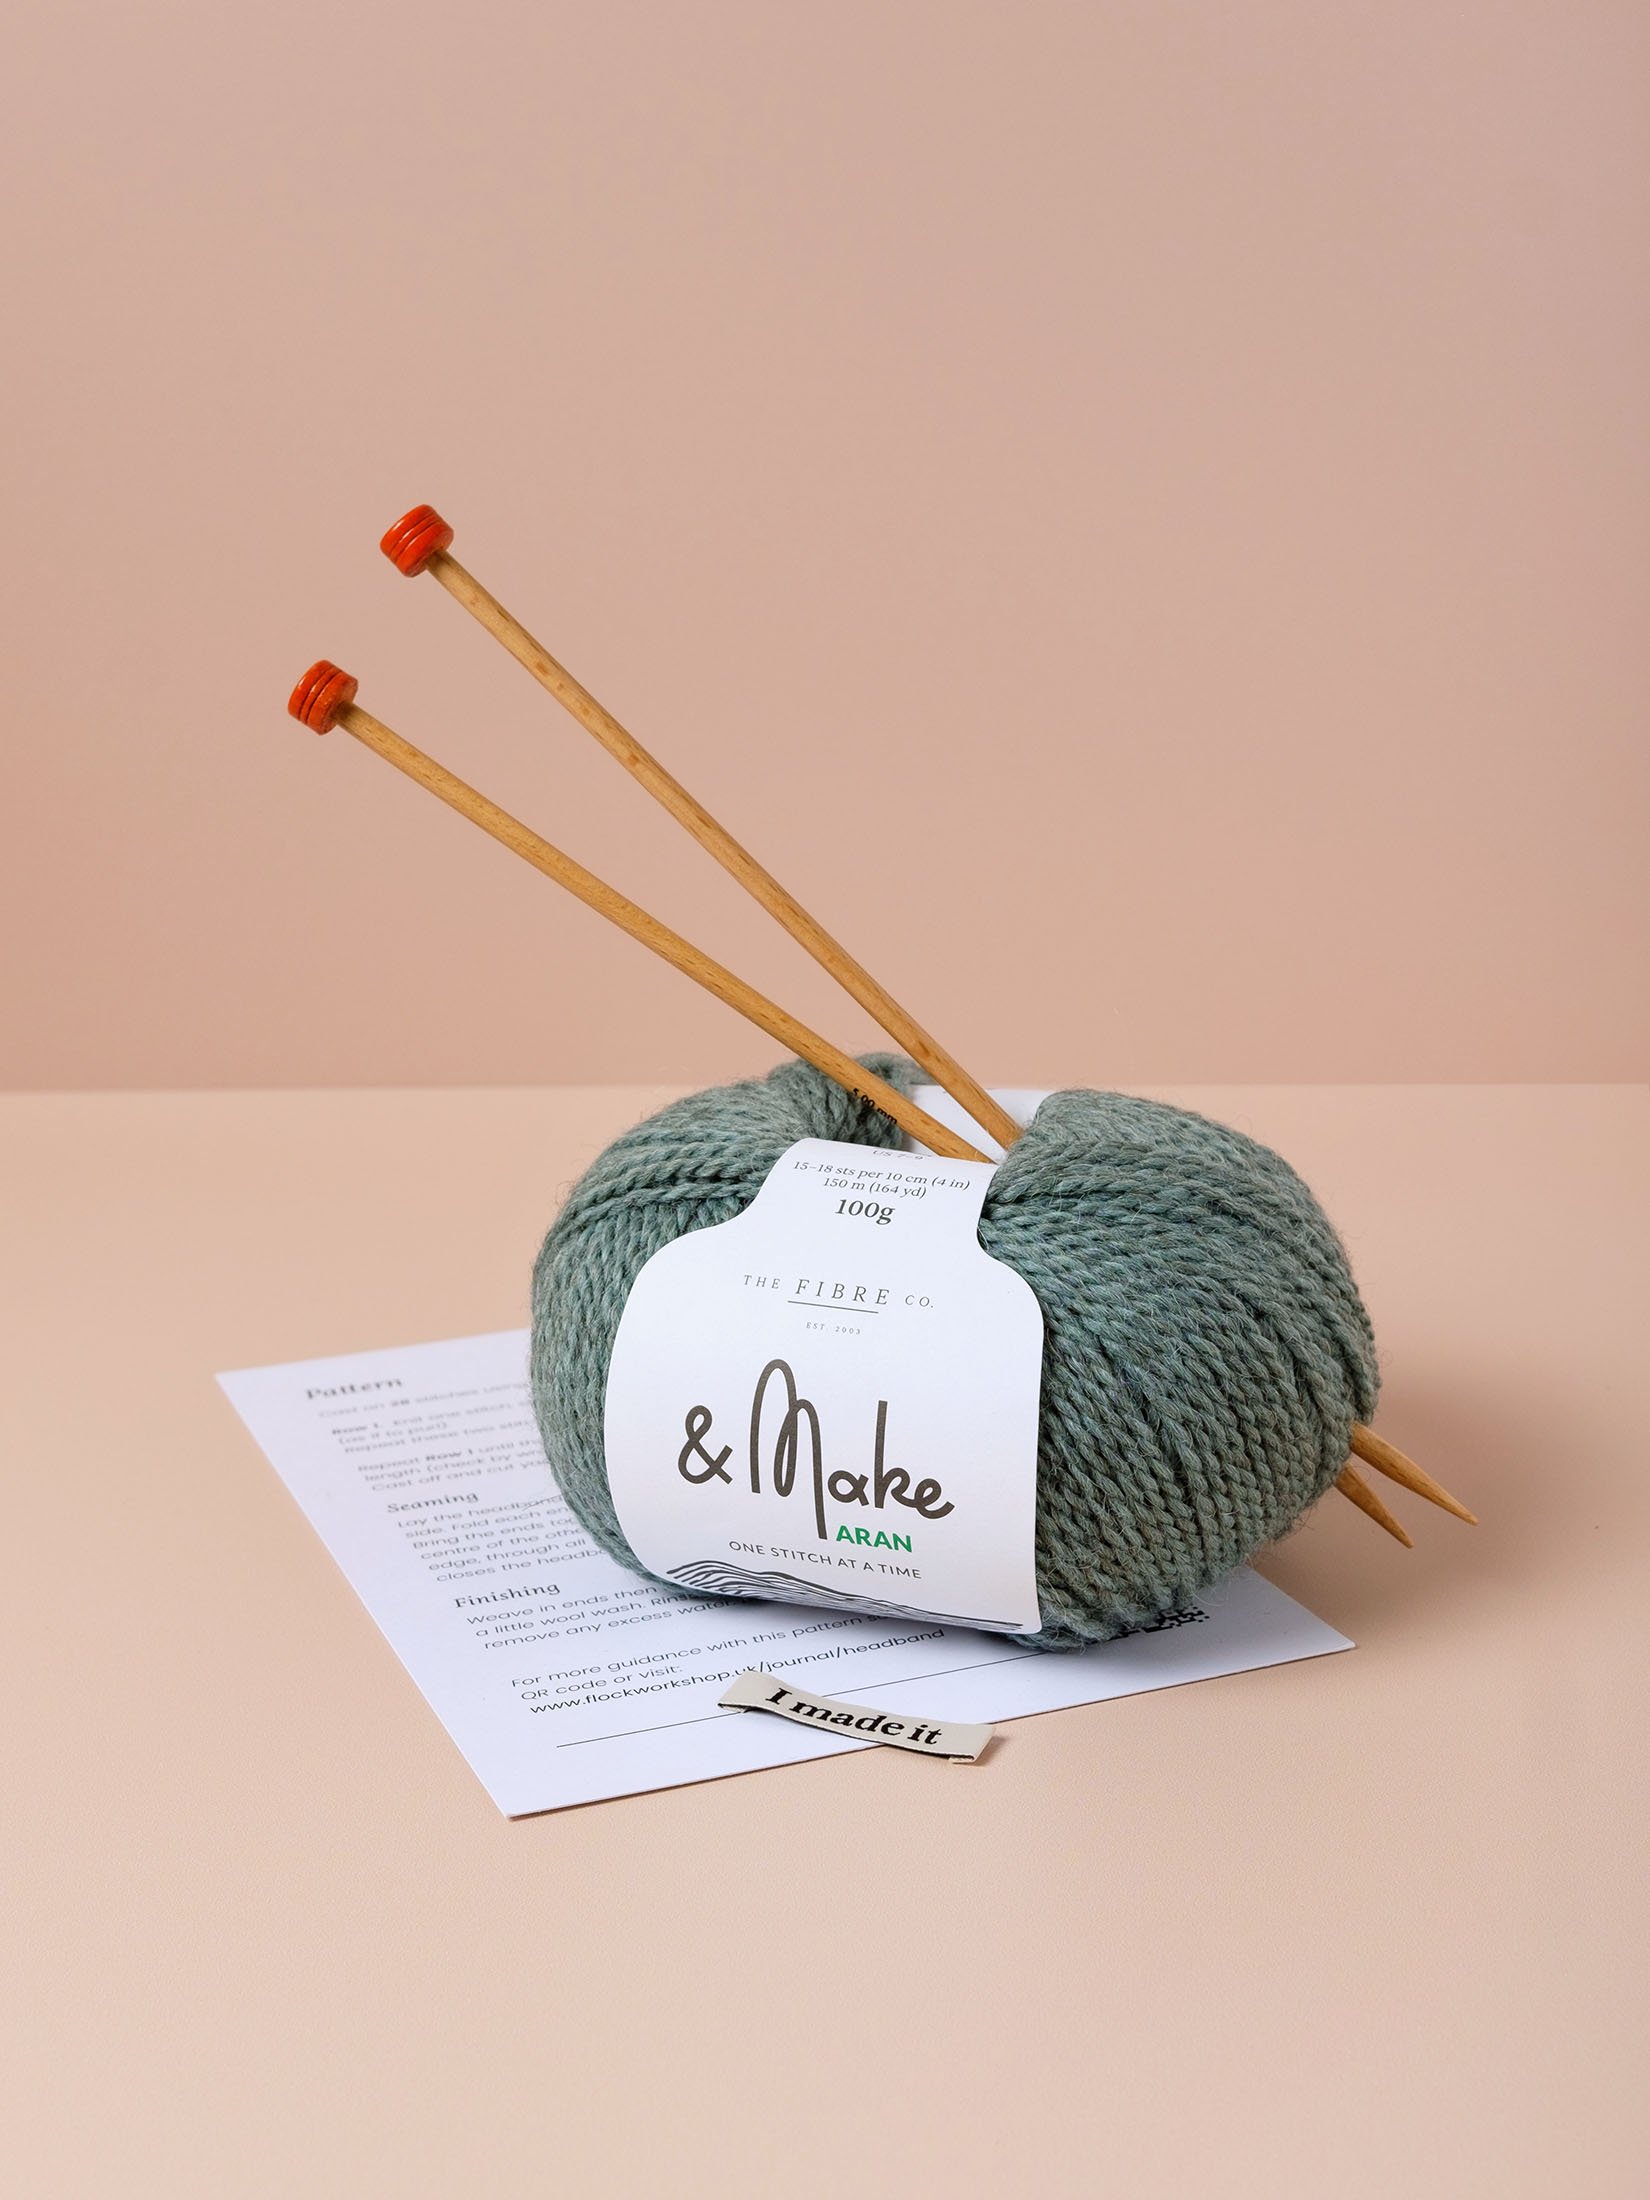 Watch Cap Knitting Kit — flock | Sustainable Yarn and Knitting Store